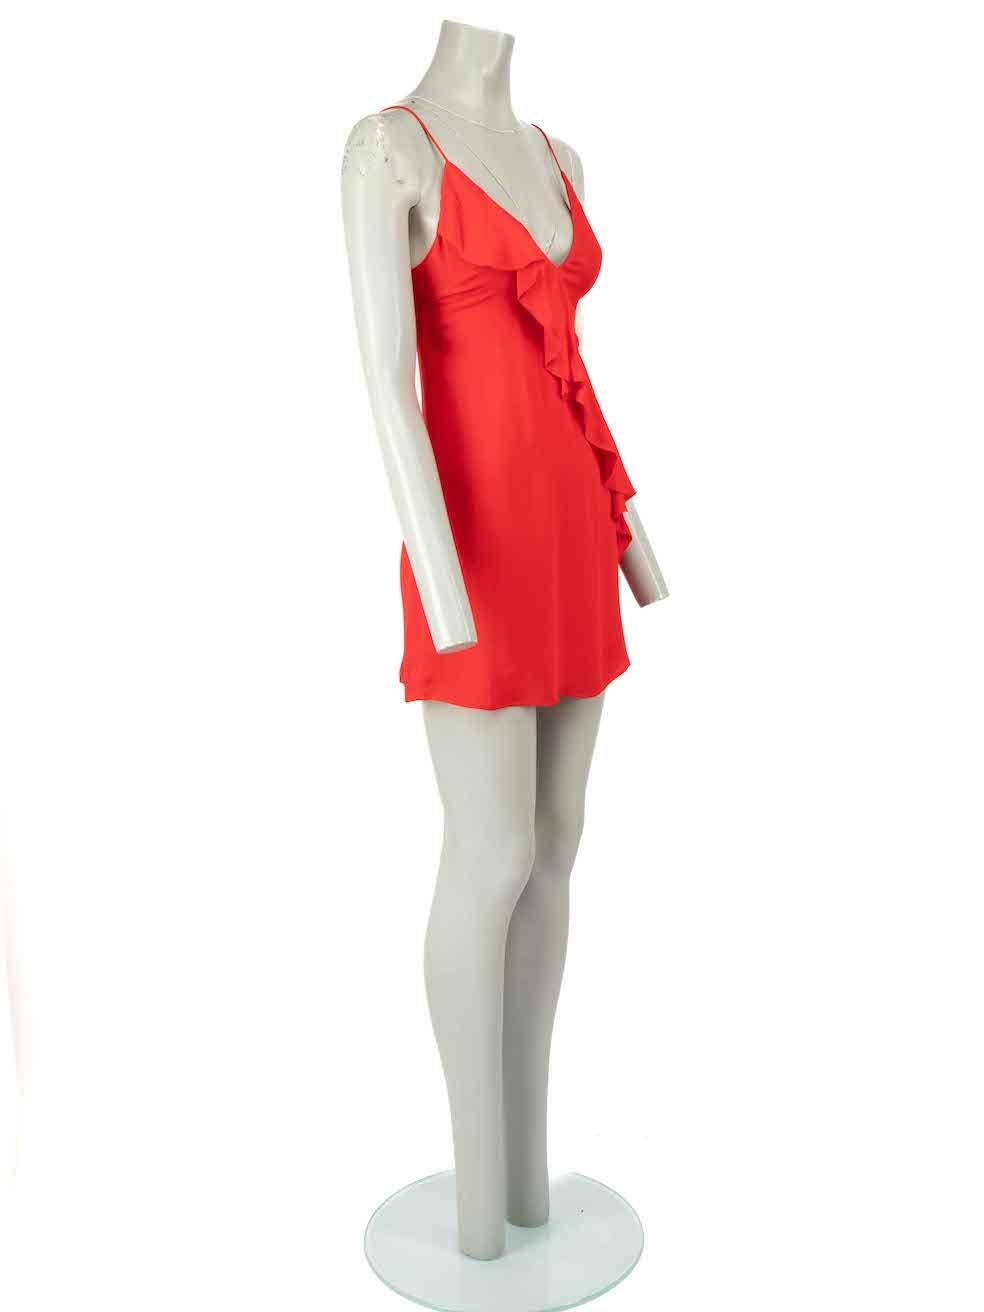 CONDITION is Good. Minor wear to dress is evident. Light wear to fabric composition with a single pull to the weave found at the centre front on this used LPA designer resale item.
 
 Details
 Red
 Silk
 Slip dress
 Mini
 V-neck
 Ruffle detail
 Side